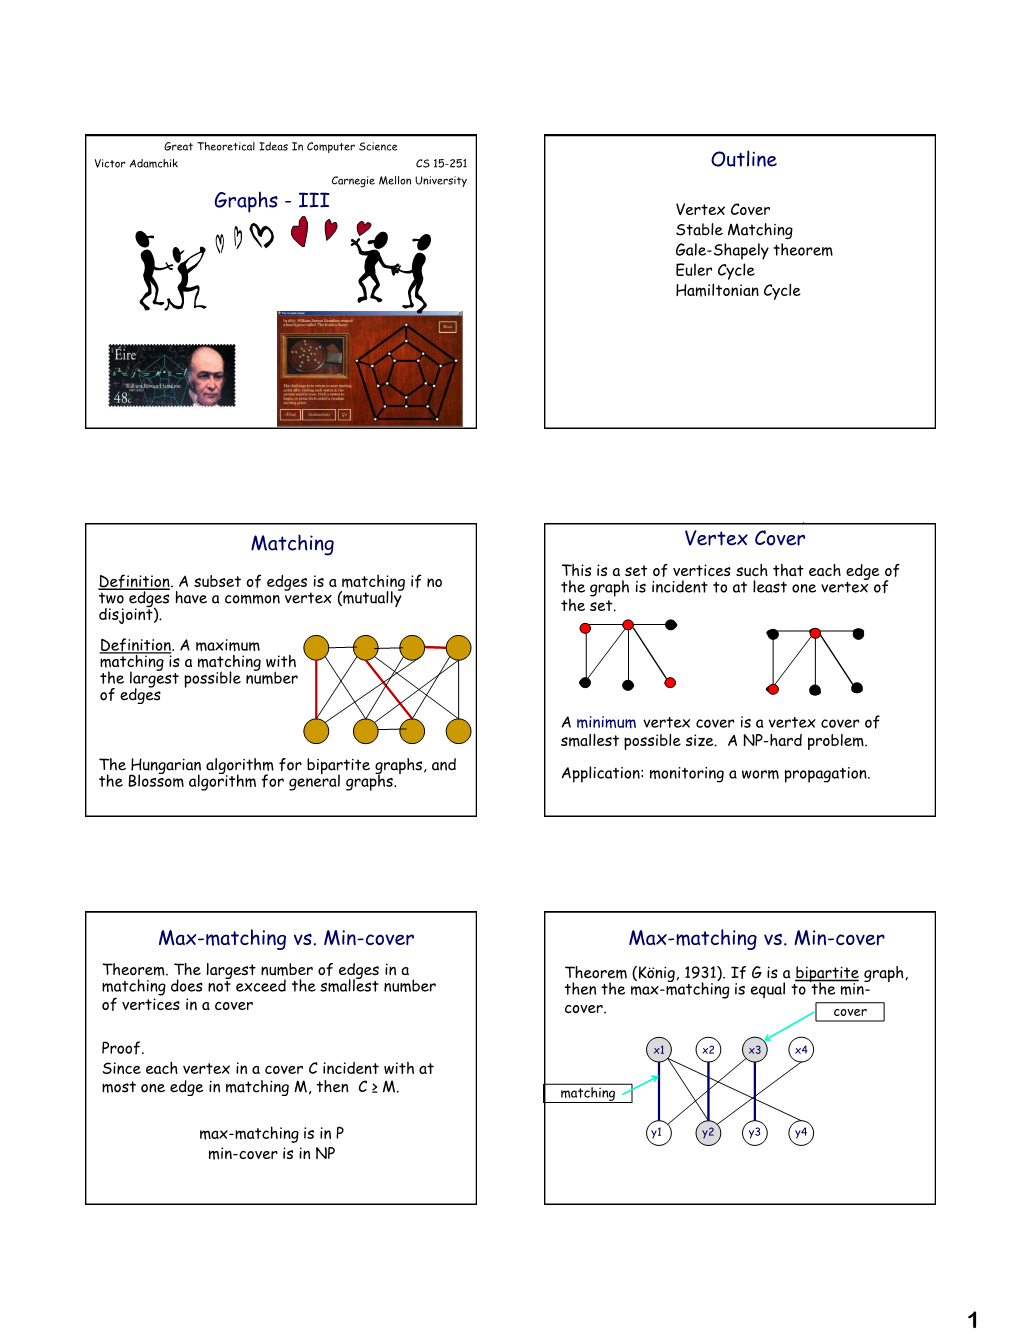 Graphs - III Vertex Cover Stable Matching Gale-Shapely Theorem Euler Cycle Hamiltonian Cycle